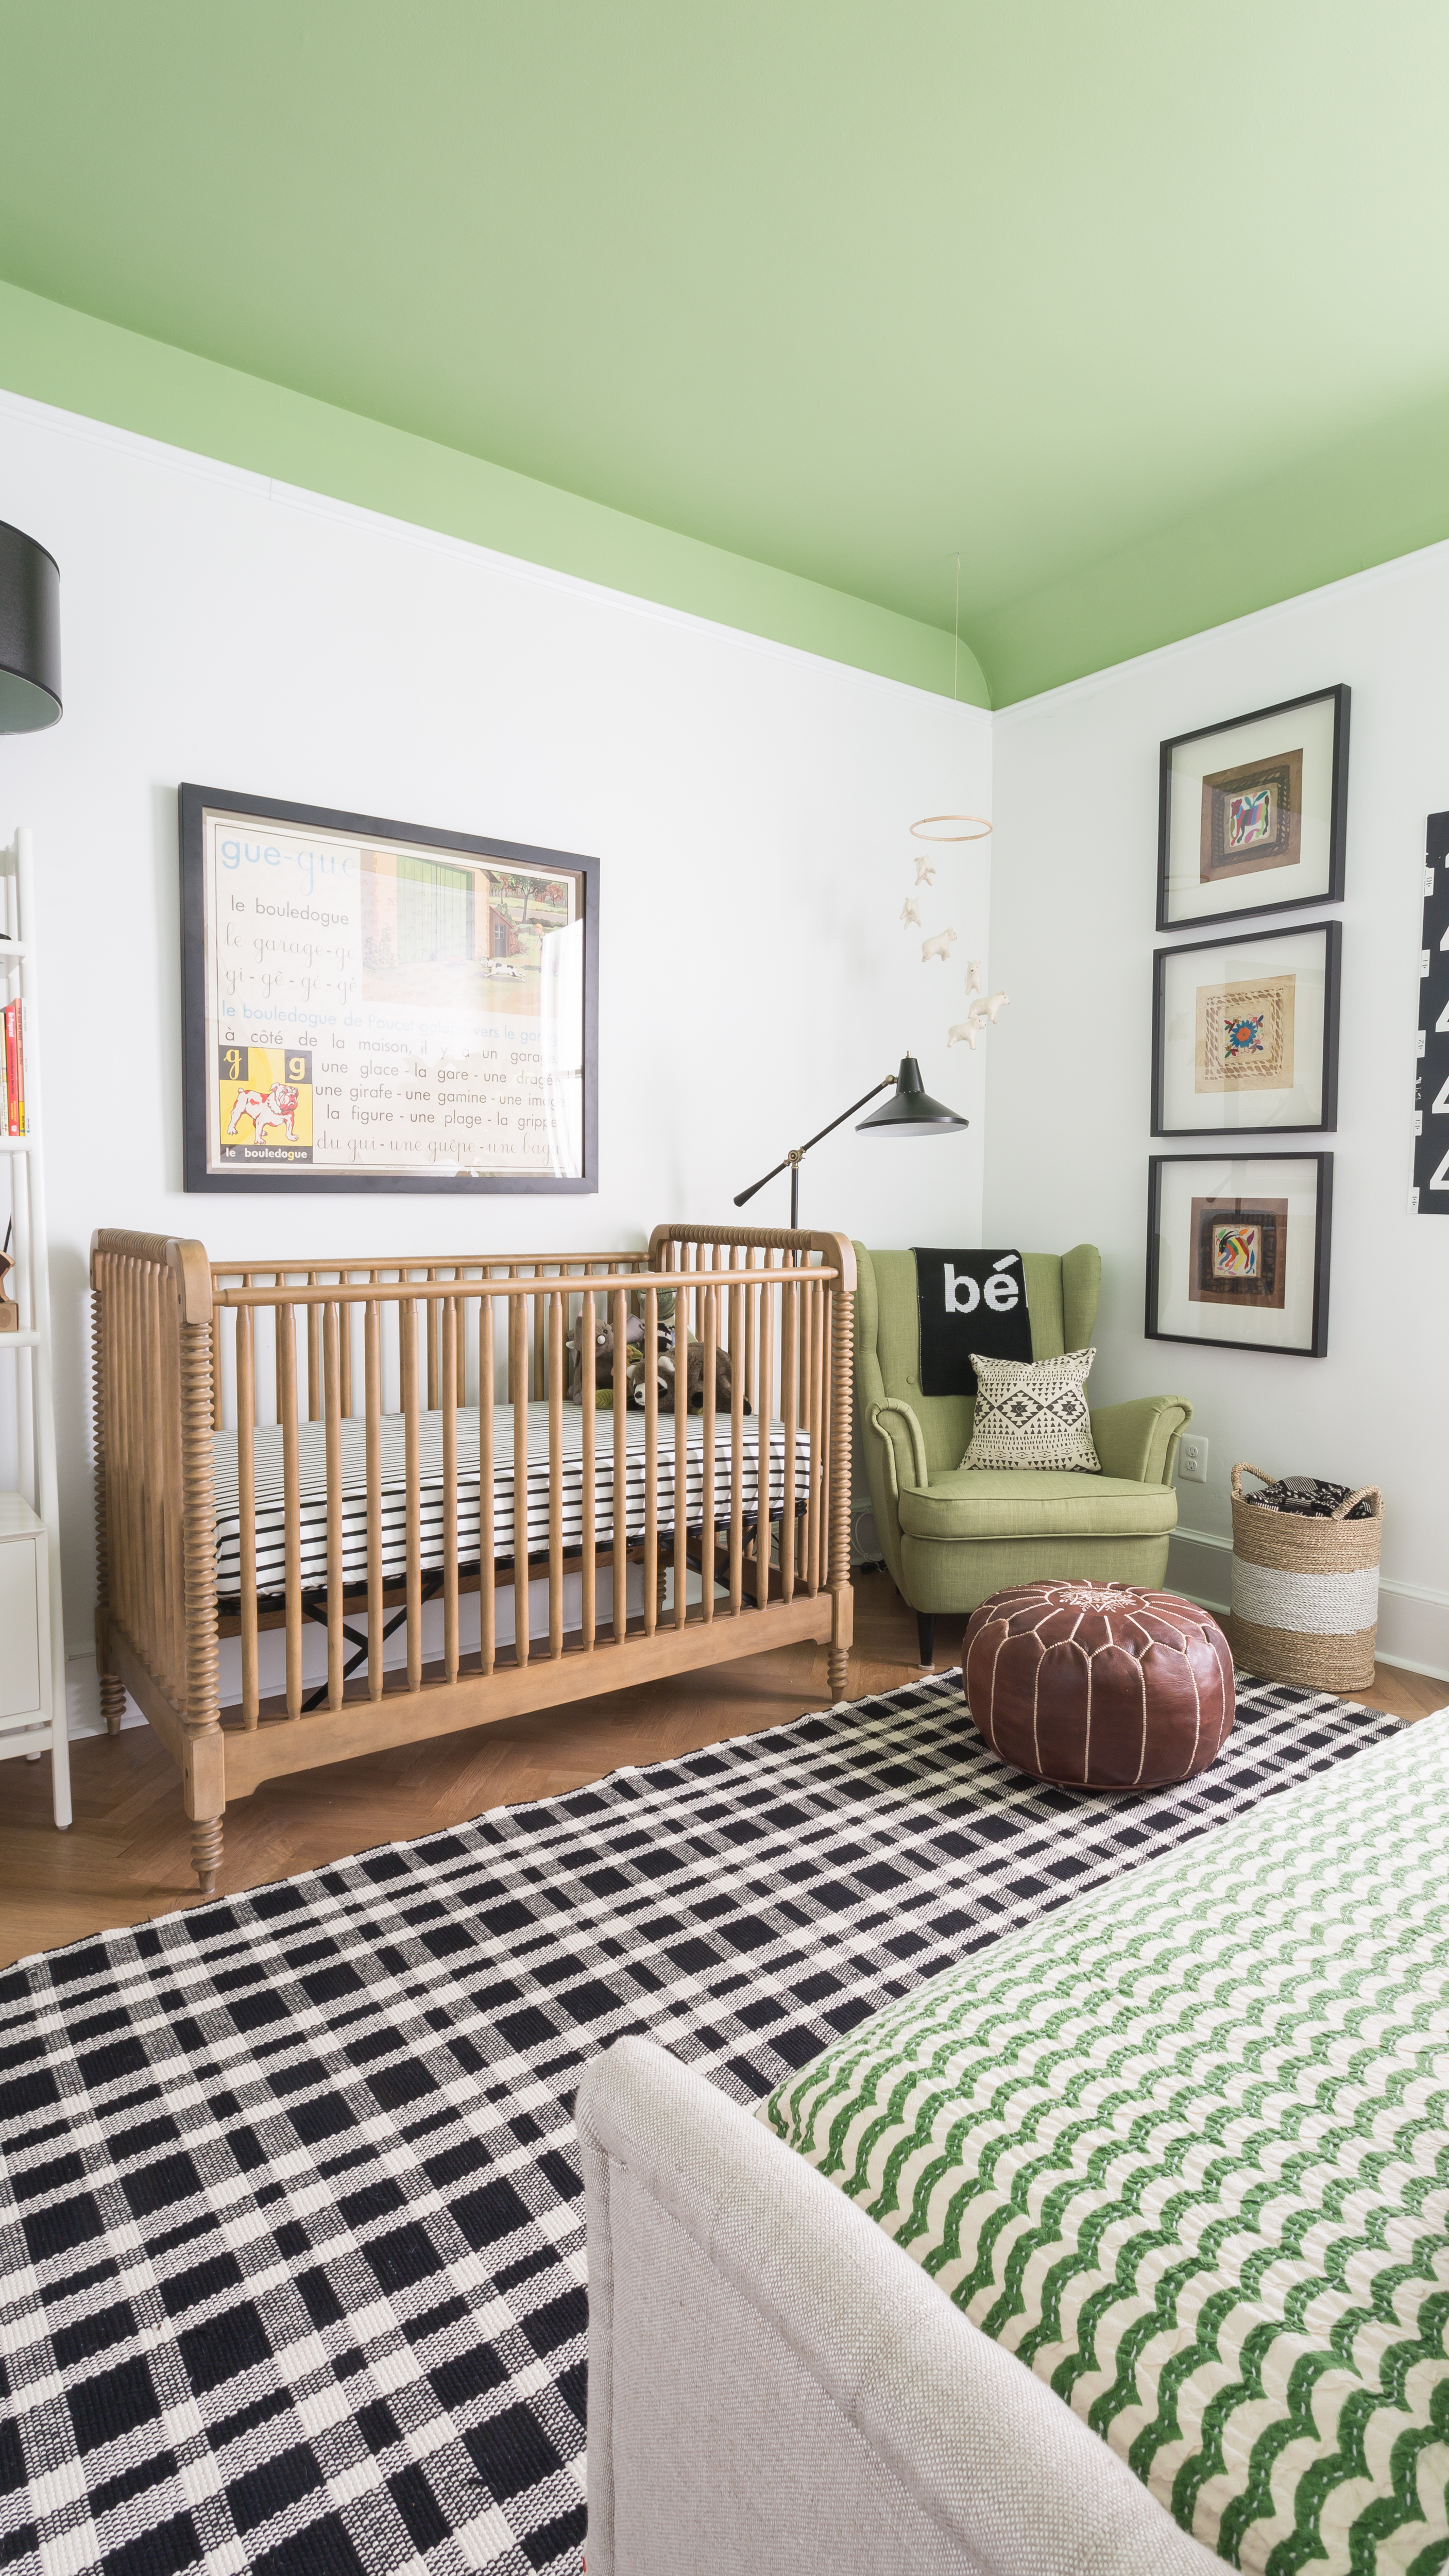 Black and White Nursery with Light Green Accents